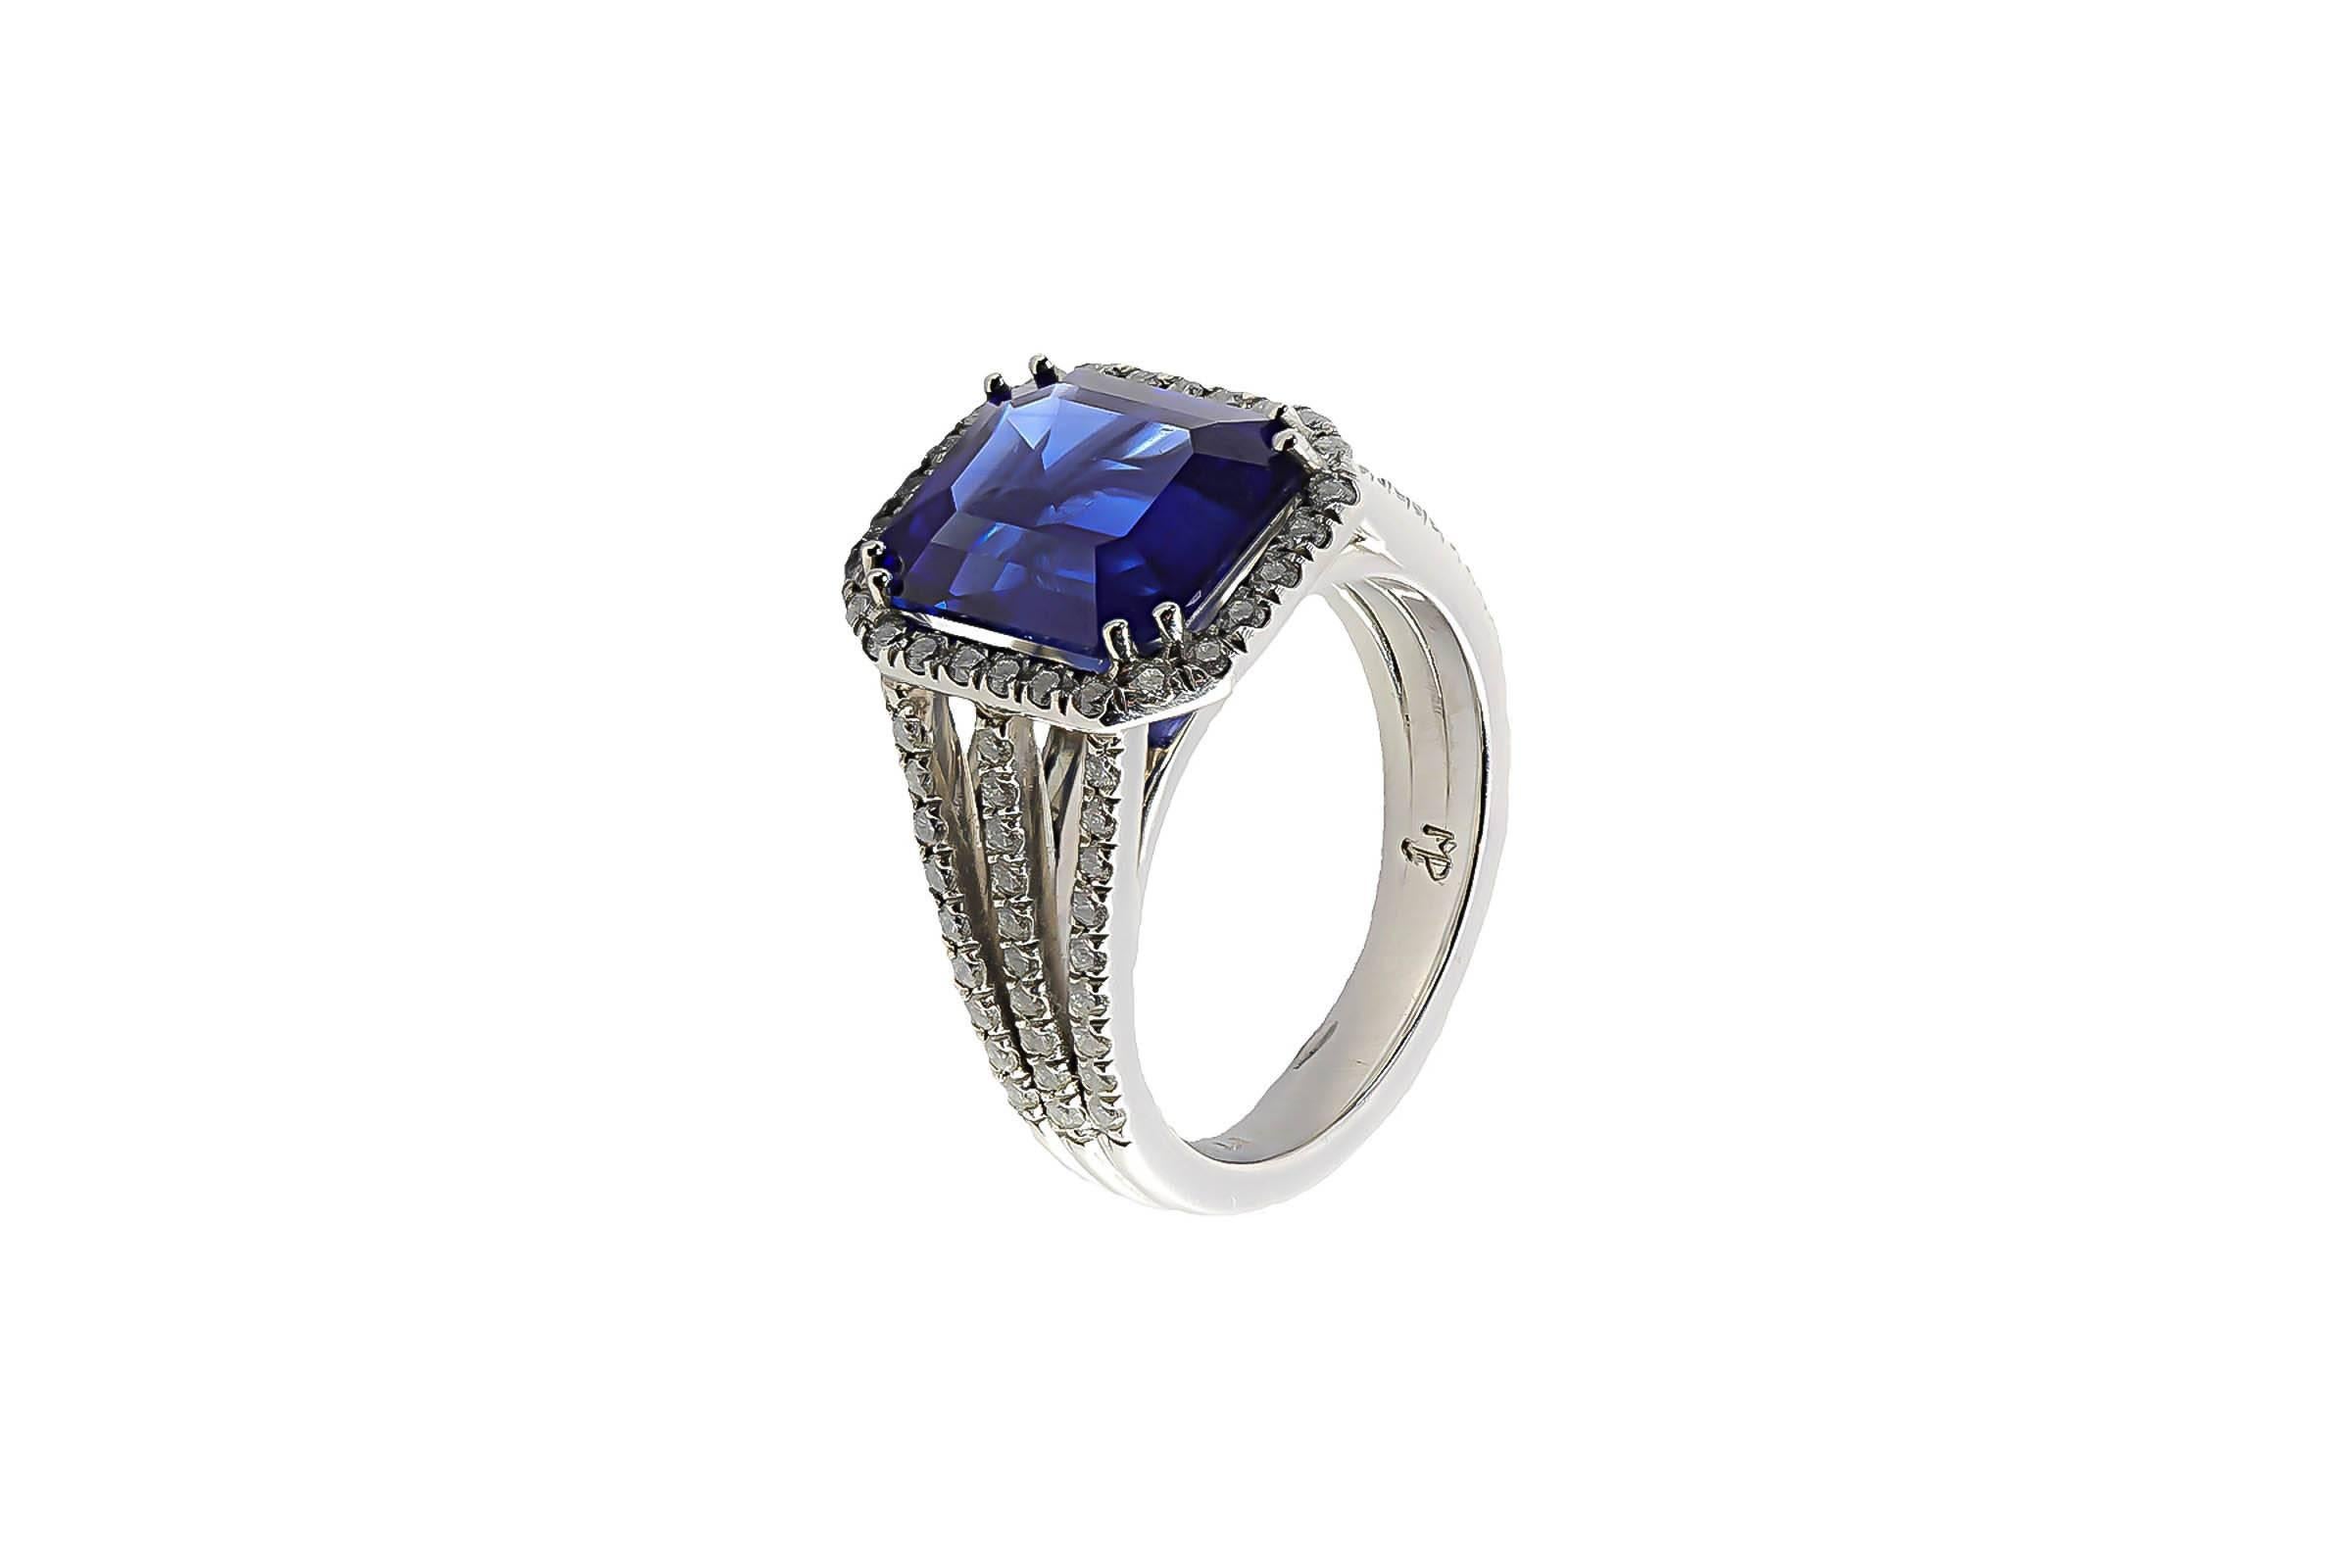 Platinum ring containing one emerald cut sapphire weighing 5.53 carats. The mounting contains 82 micro pave set diamonds weighing combined 0.59 carat, G color, VS clarity.
Size 6. Can be sized.